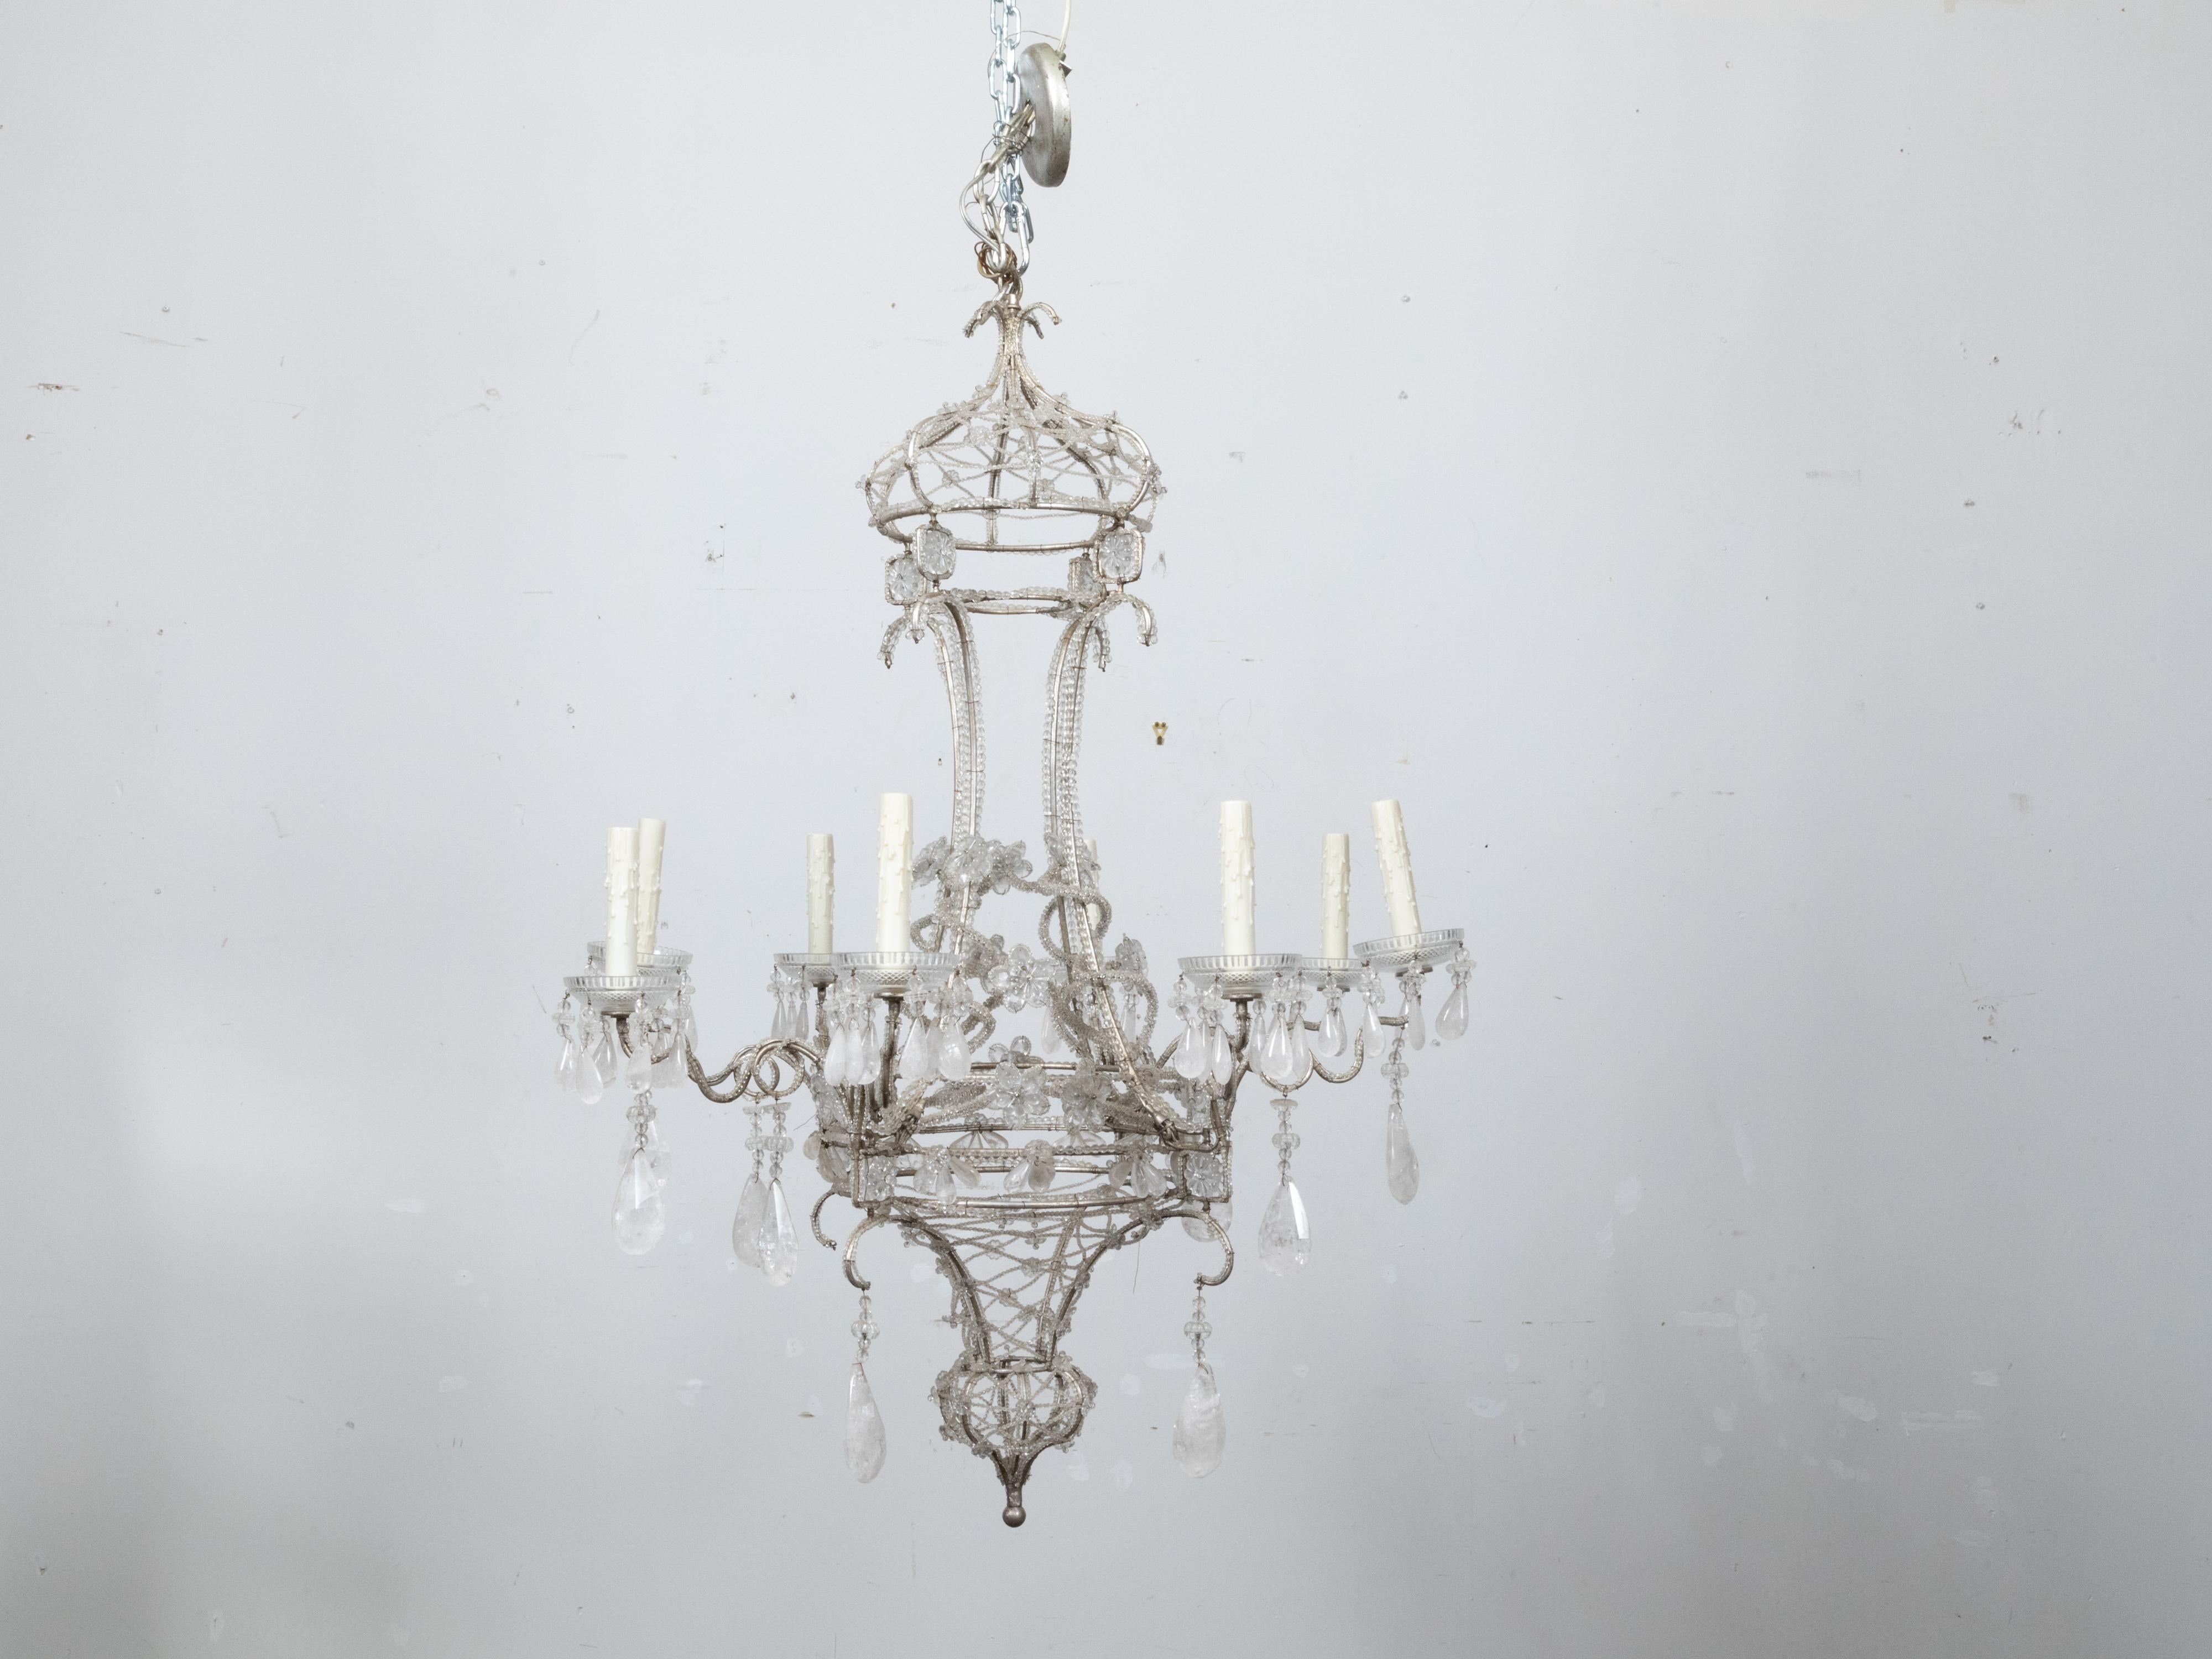 An Italian 1920s rock crystal eight-light chandelier with petite beads draping the silvered metal frame. Elevate your interior decor with this exquisite Italian 1920s rock crystal eight-light chandelier, an illustrious embodiment of elegant design